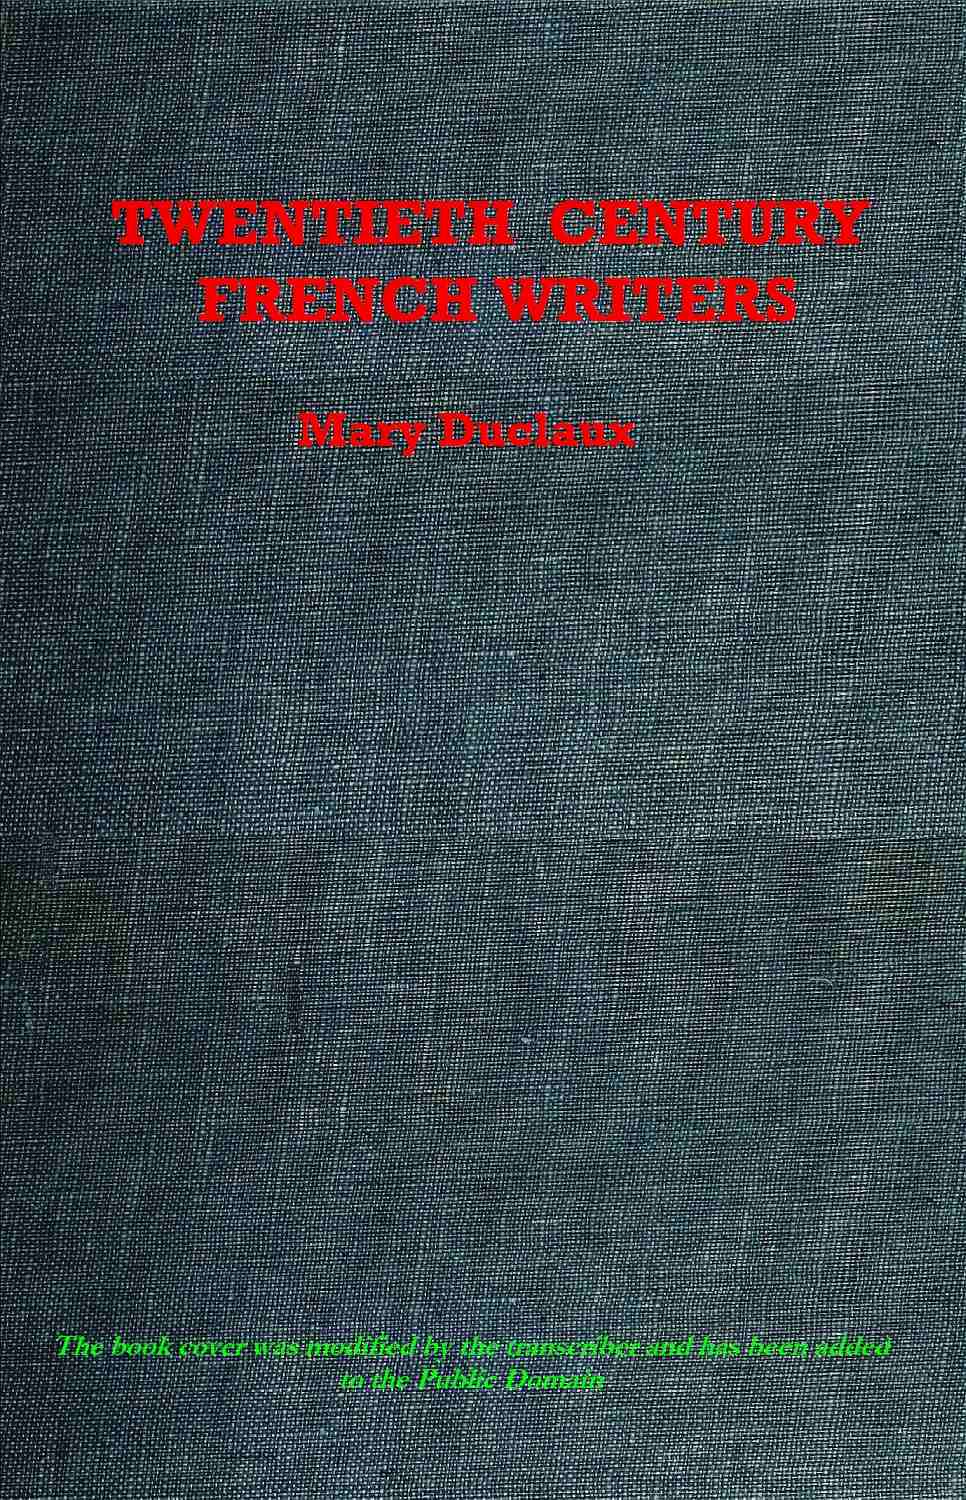 Twentieth Century French Writers, by Mary Duclaux—A Project Gutenberg eBook pic